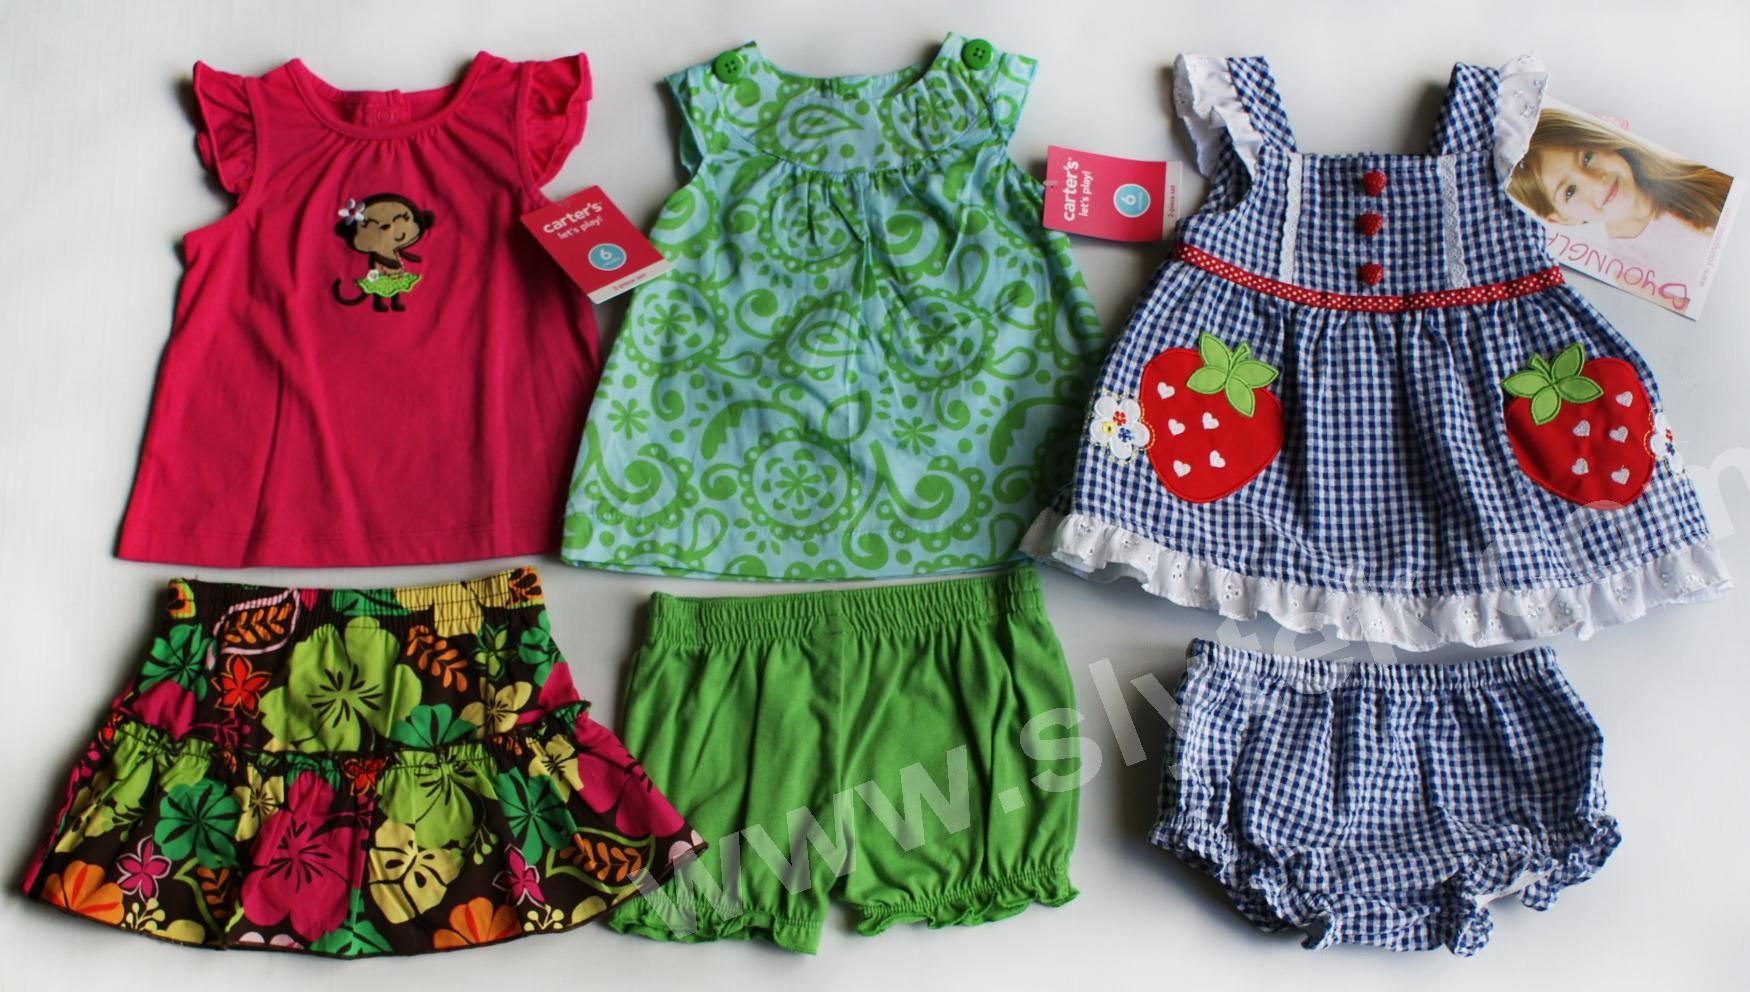 NWT Baby Girls Summer Clothes 6m Lot 6pc Carters Outfit NEW Dress